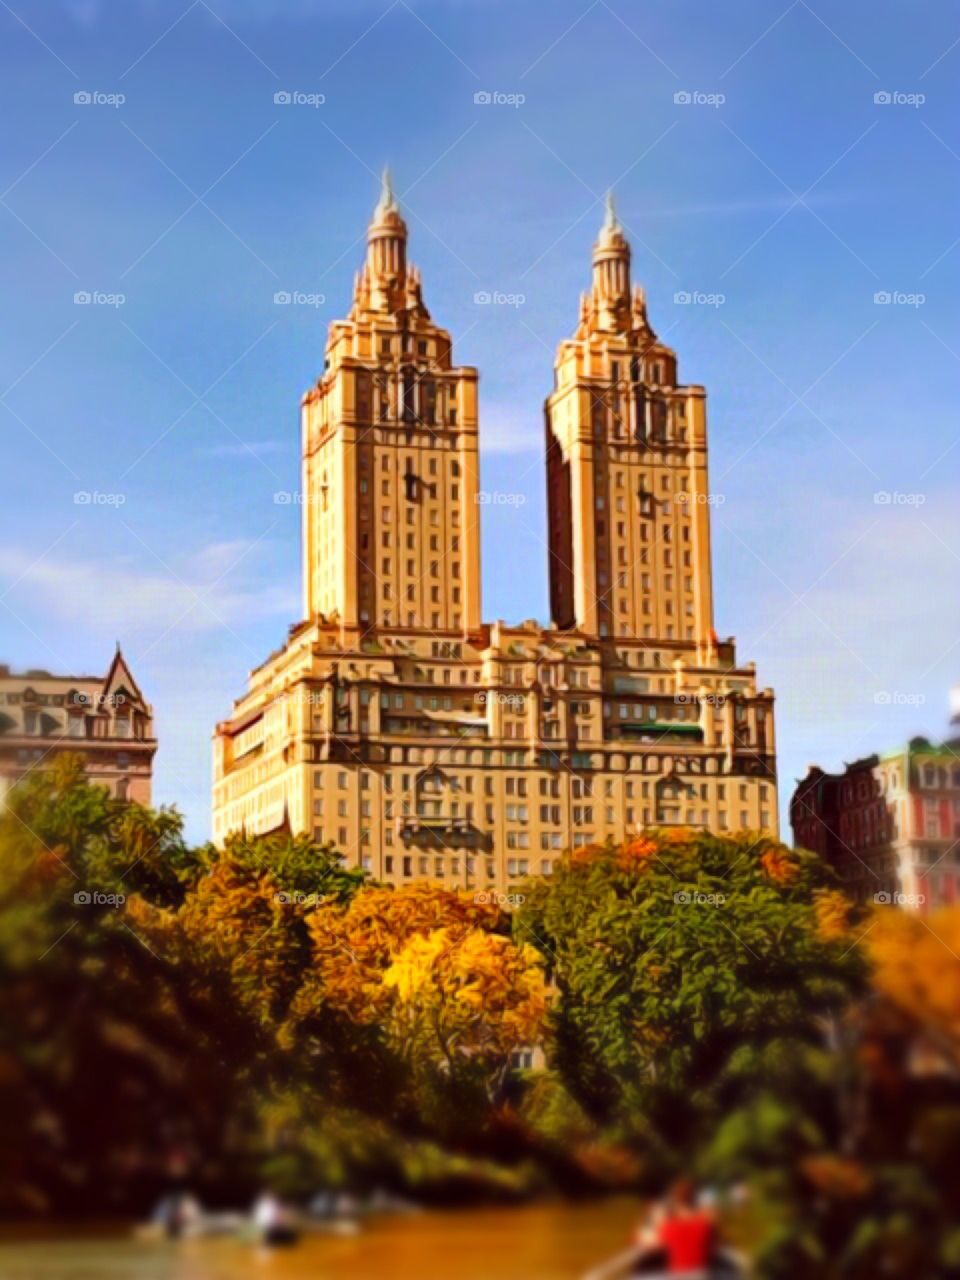 San Remo Building view, from the Lake  - Central Park, Manhattan, New York City.